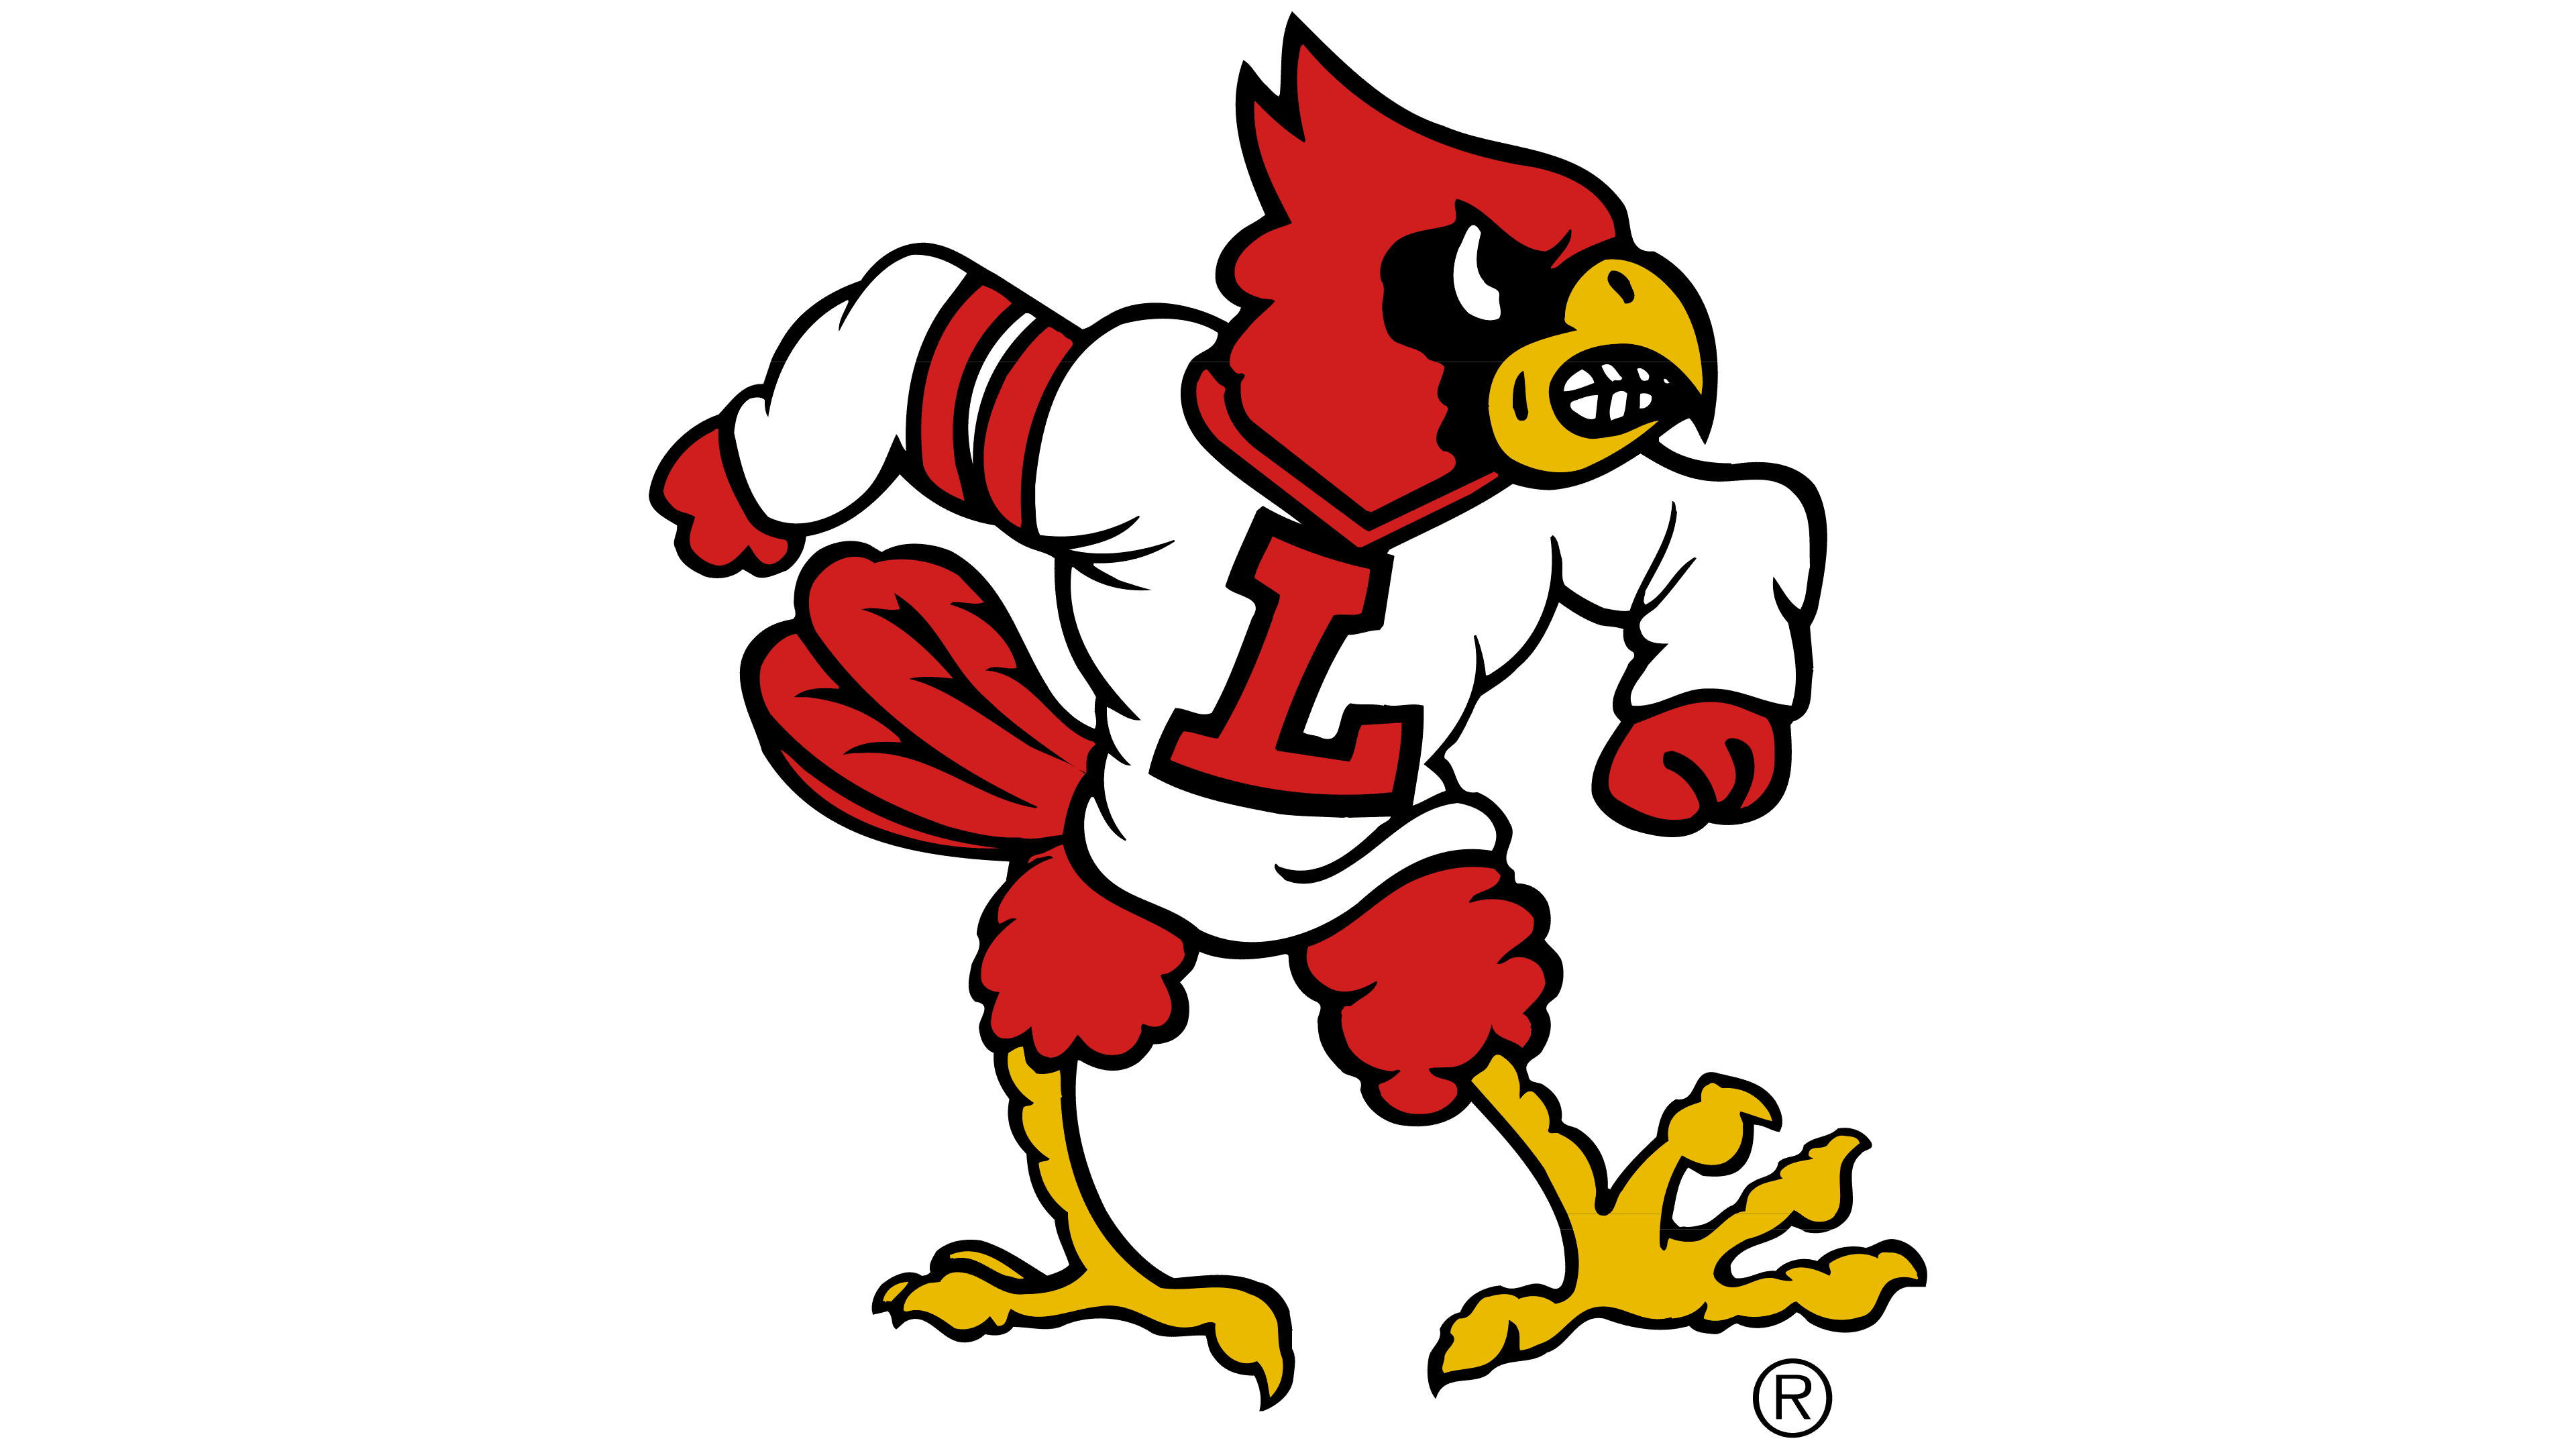 Louisville Cardinals Logo, meaning, history, PNG, SVG, vector